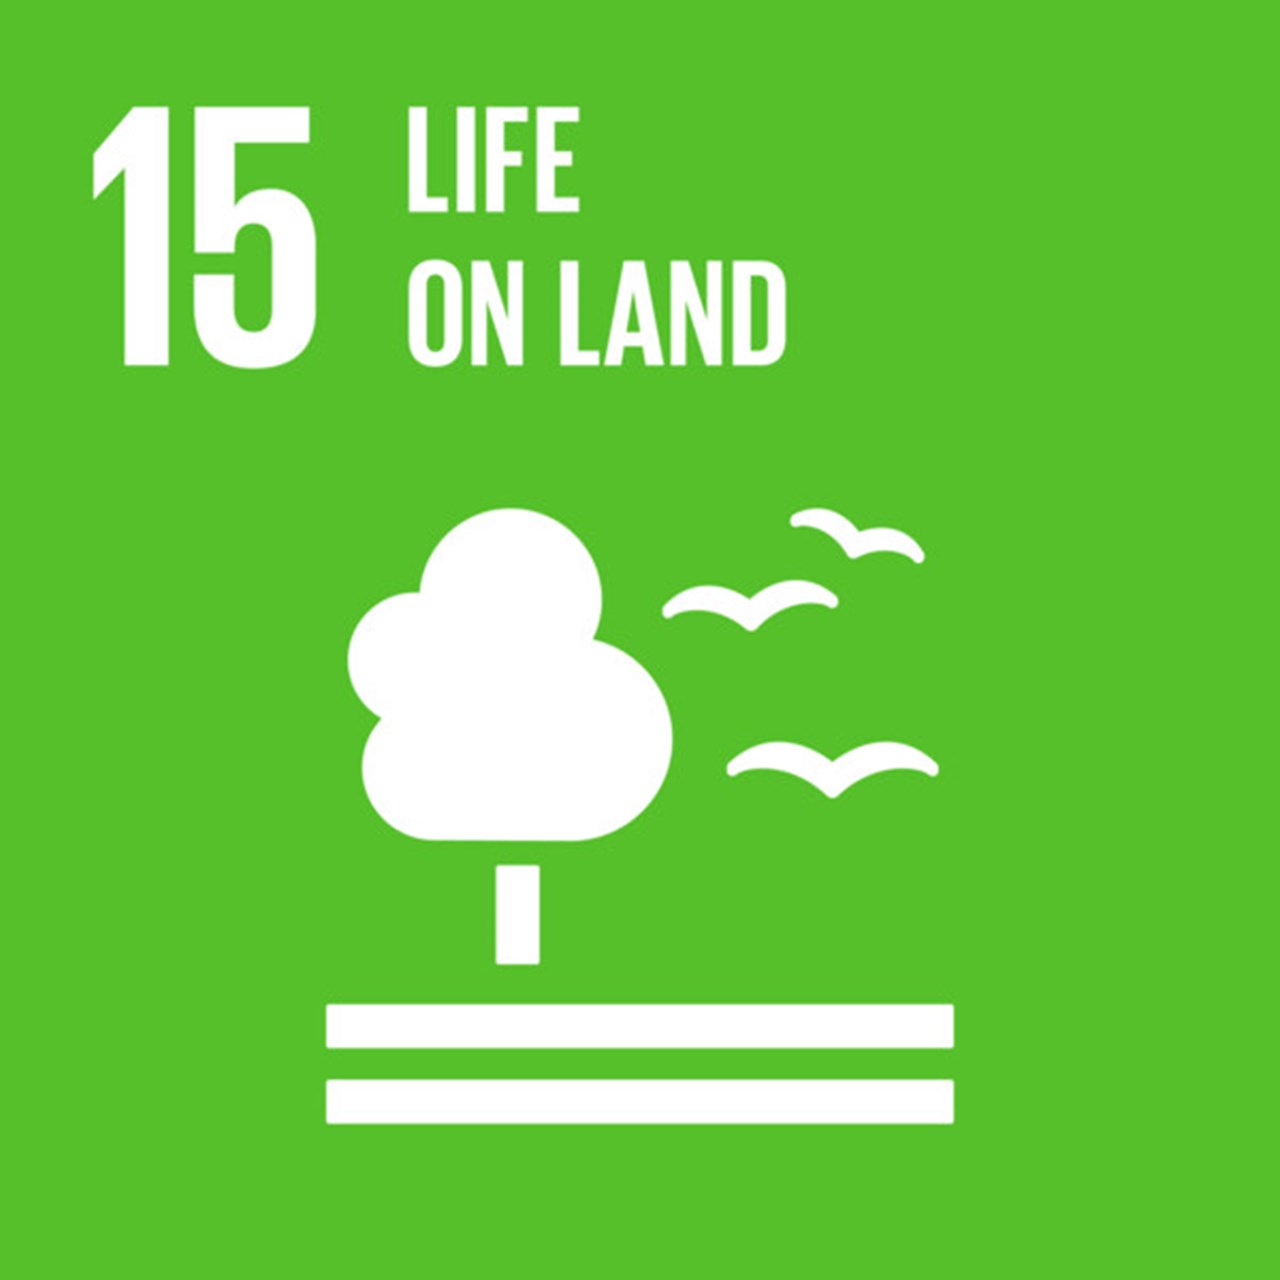 The Global Goals, Goal 15 - Life on Land